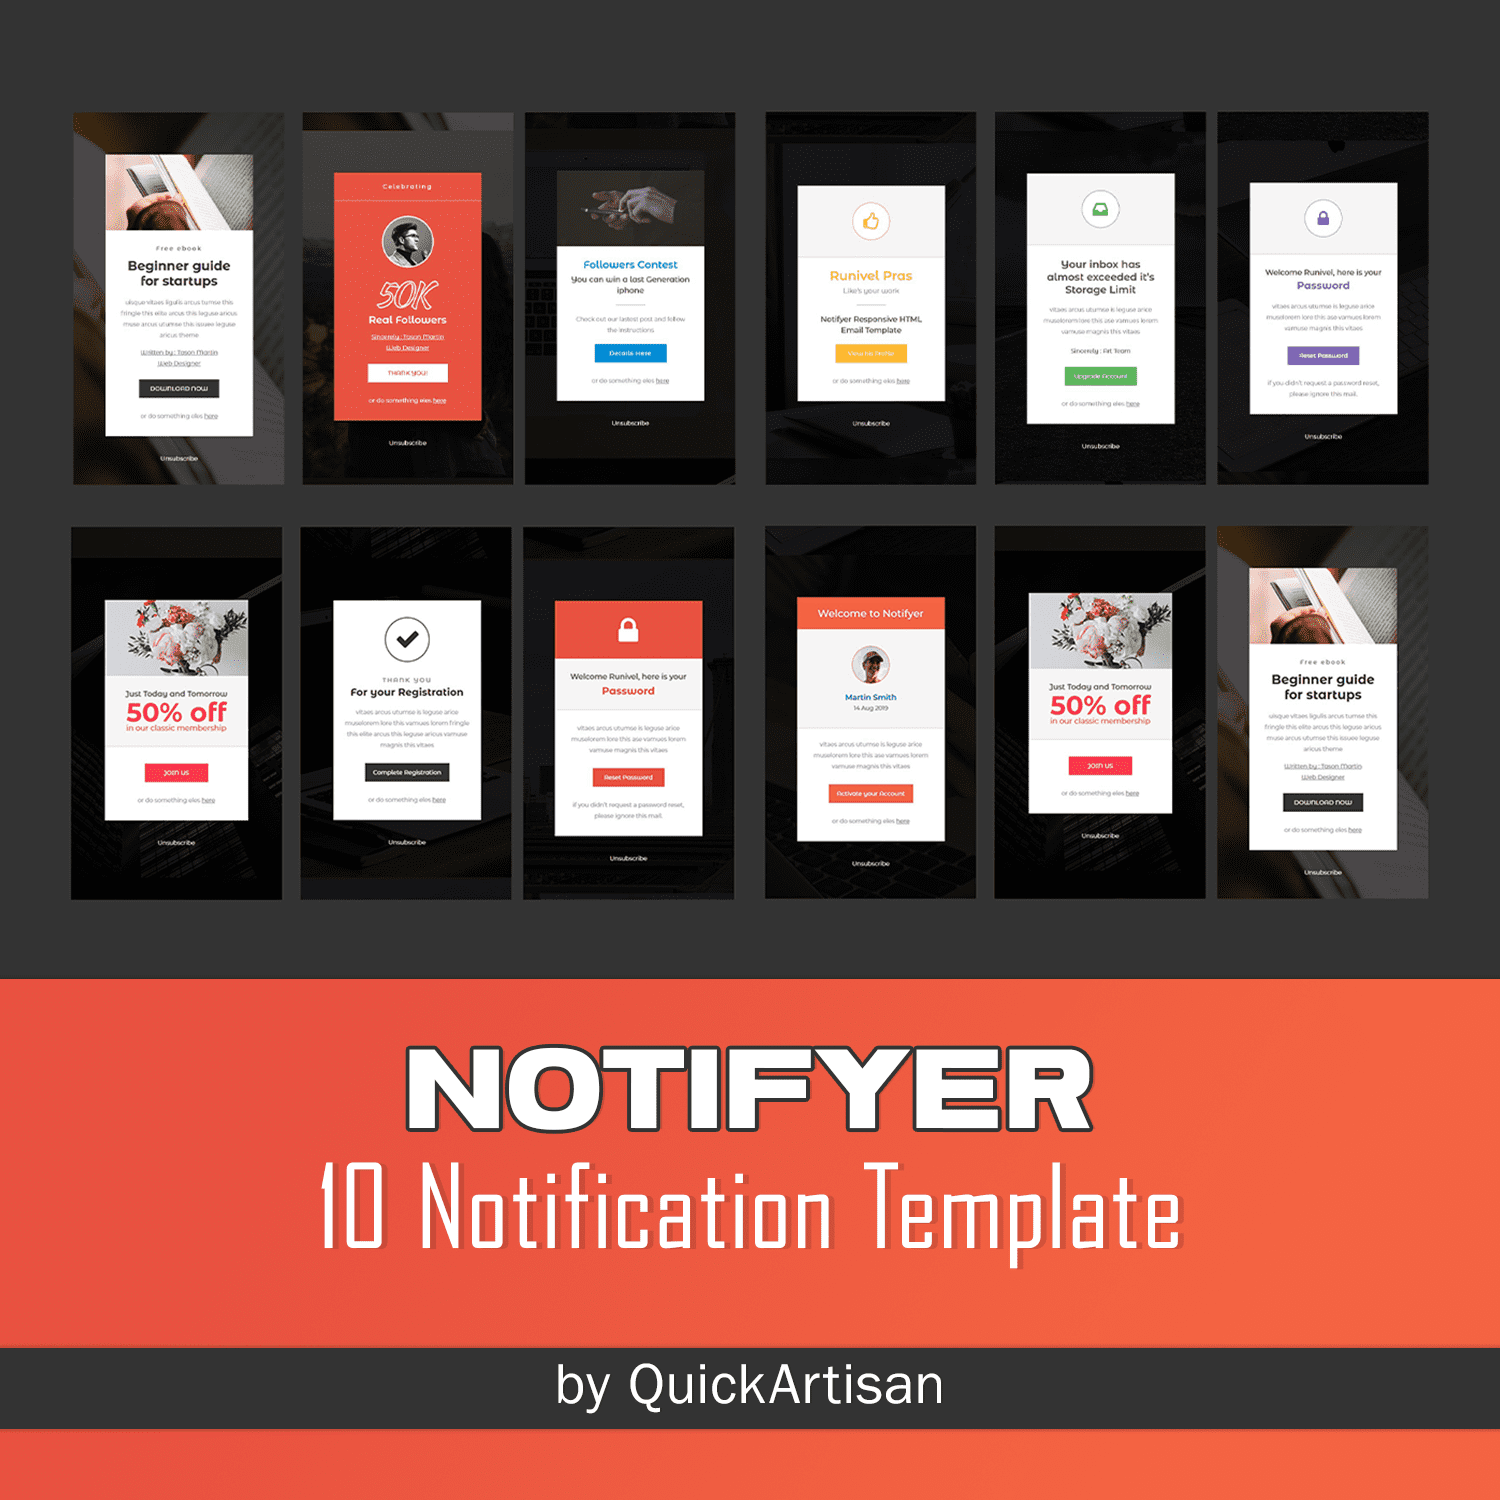 Pack of images of usability notification design templates.